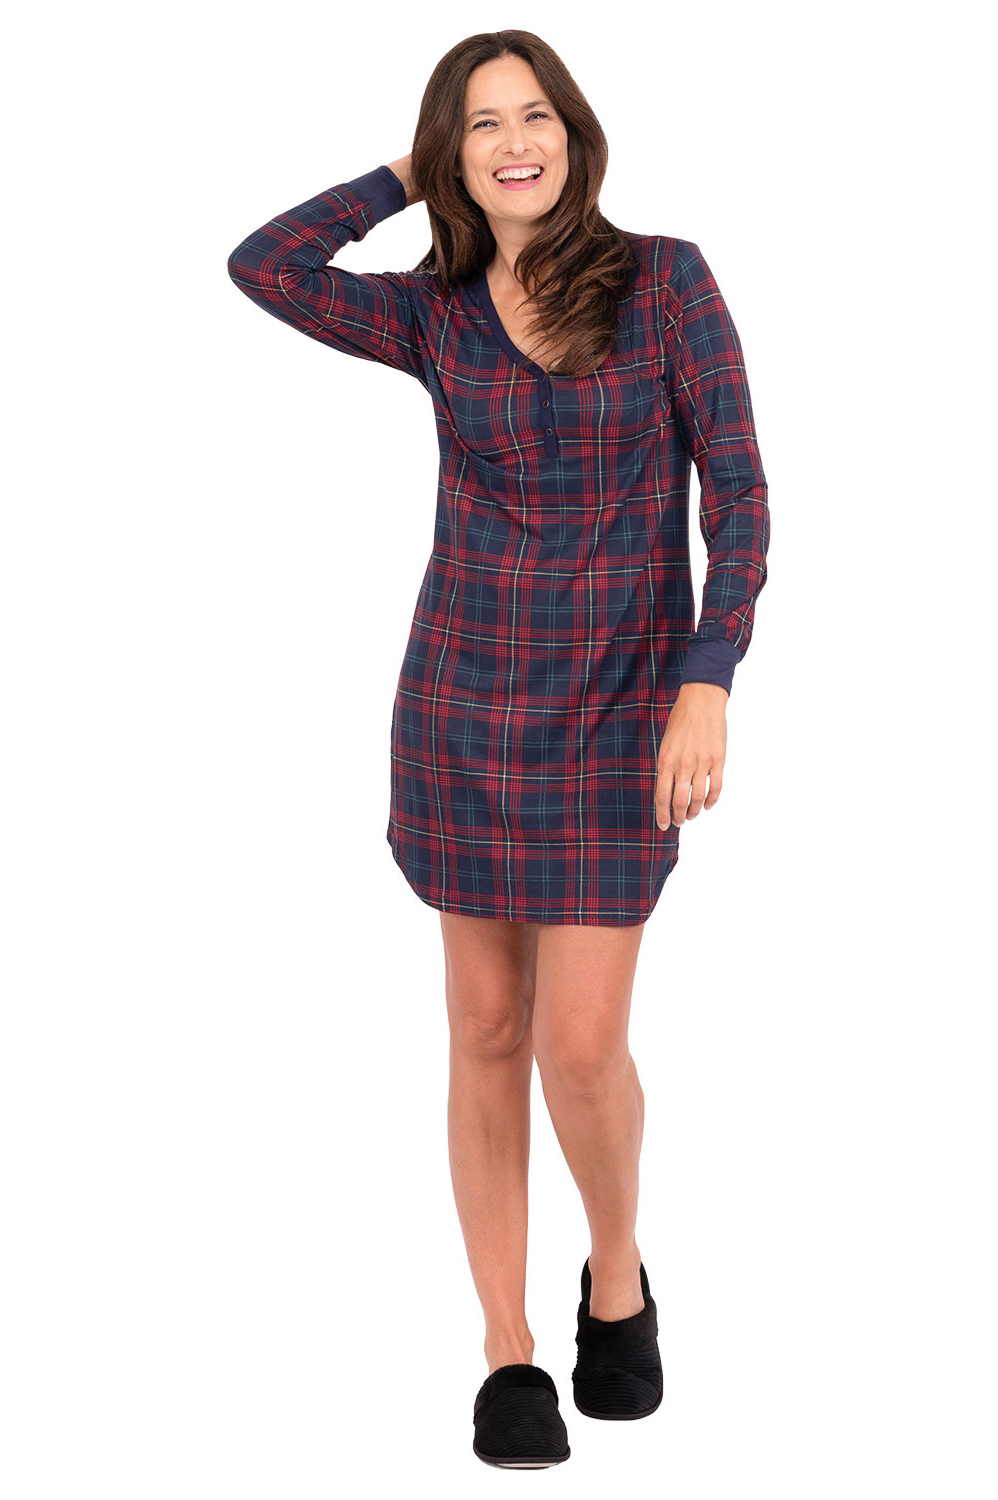 Soft touch, long sleeve v-neck sleepshirt with snap button detail, blue plaid, large (L)